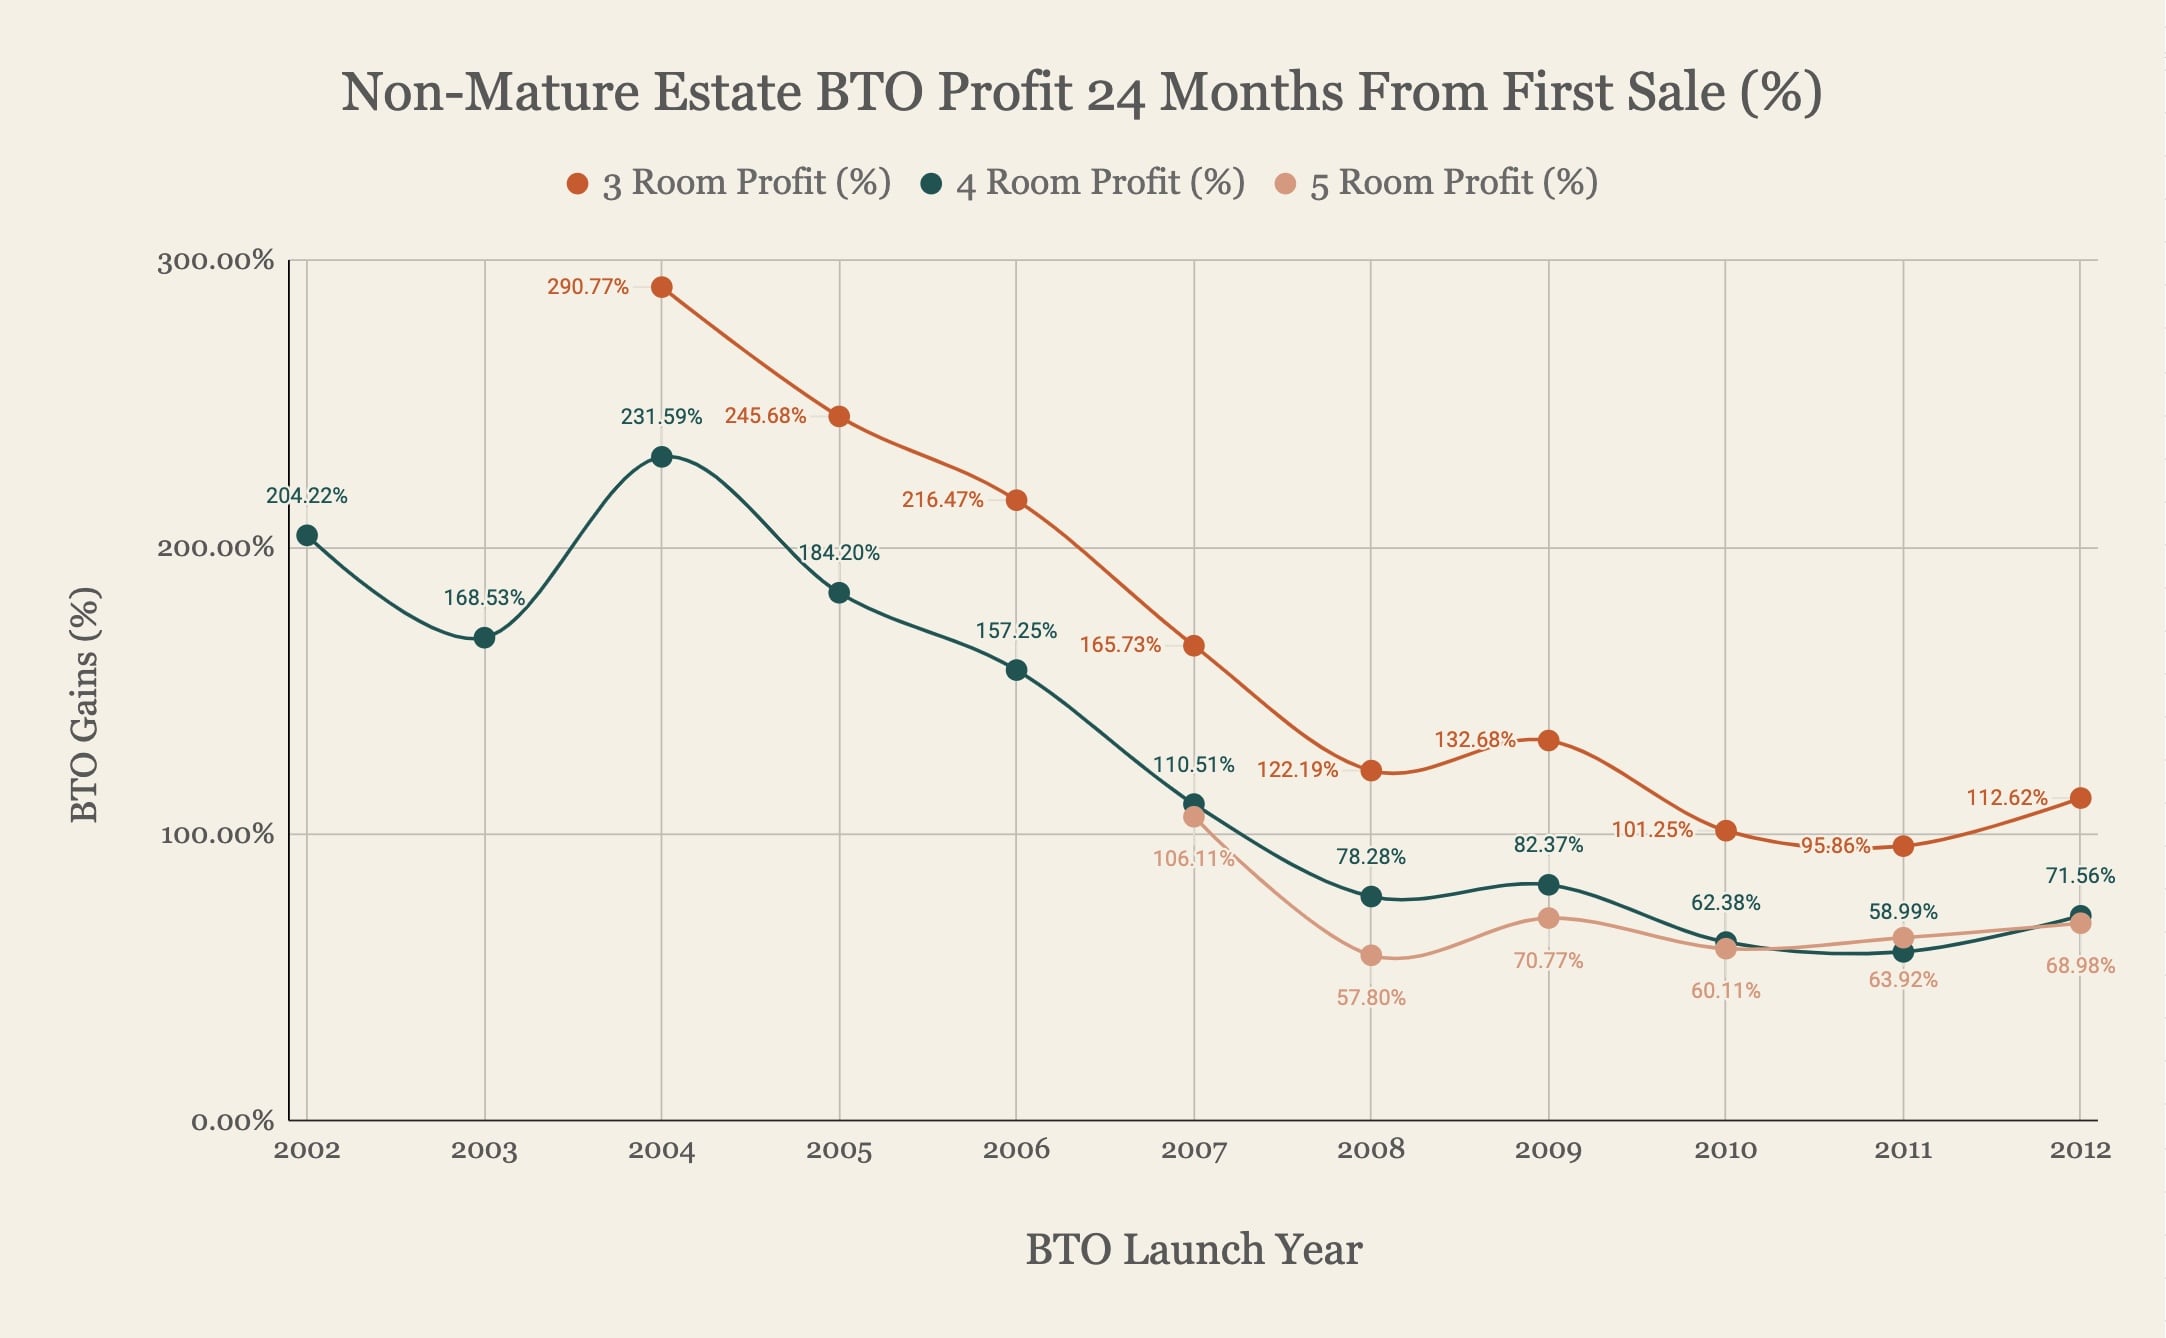 Non Mature Estate BTO Profit 24 Months From First Sale